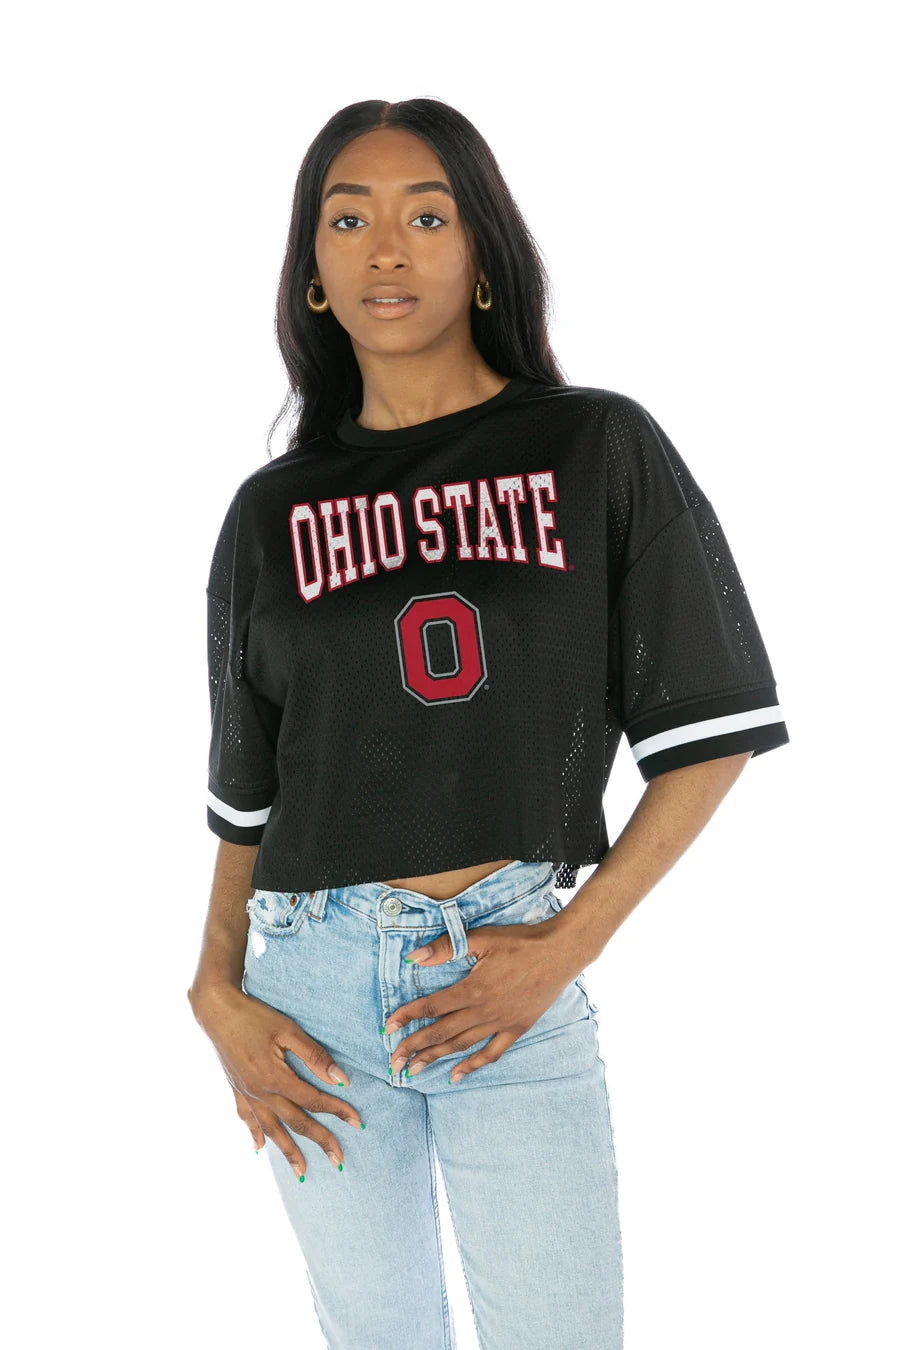 Ohio State Buckeyes "Game Face" Moderately Fitted Fashion Jersey 